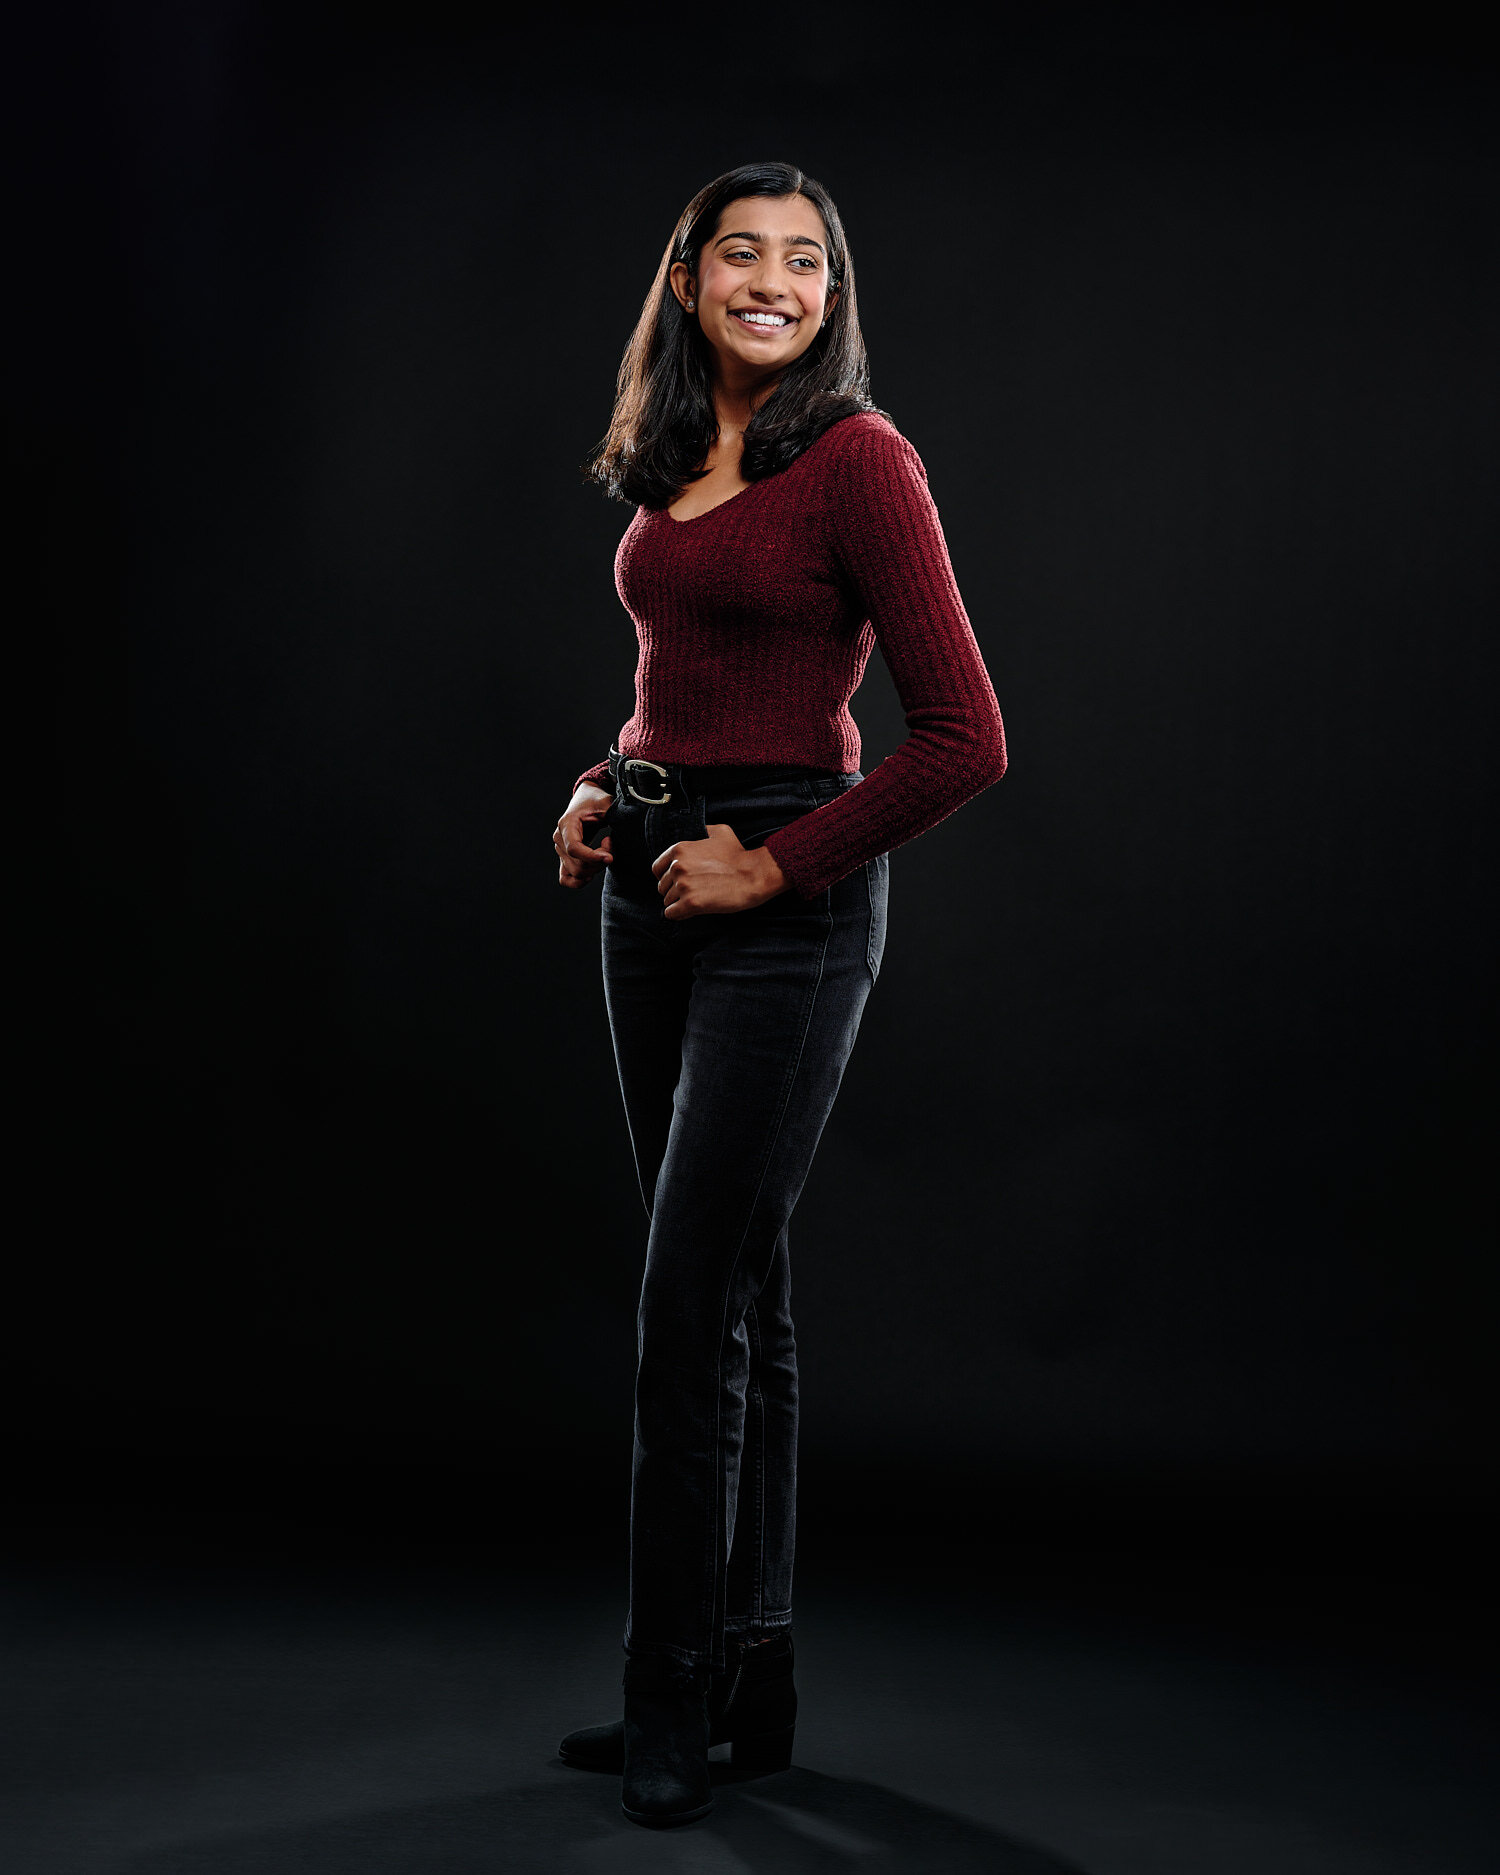  Avani Venkat is posing for studio portraits. The beautiful teenage actress will use the headshots, waist-up and full-length portraits for her theater auditions and college applications. 